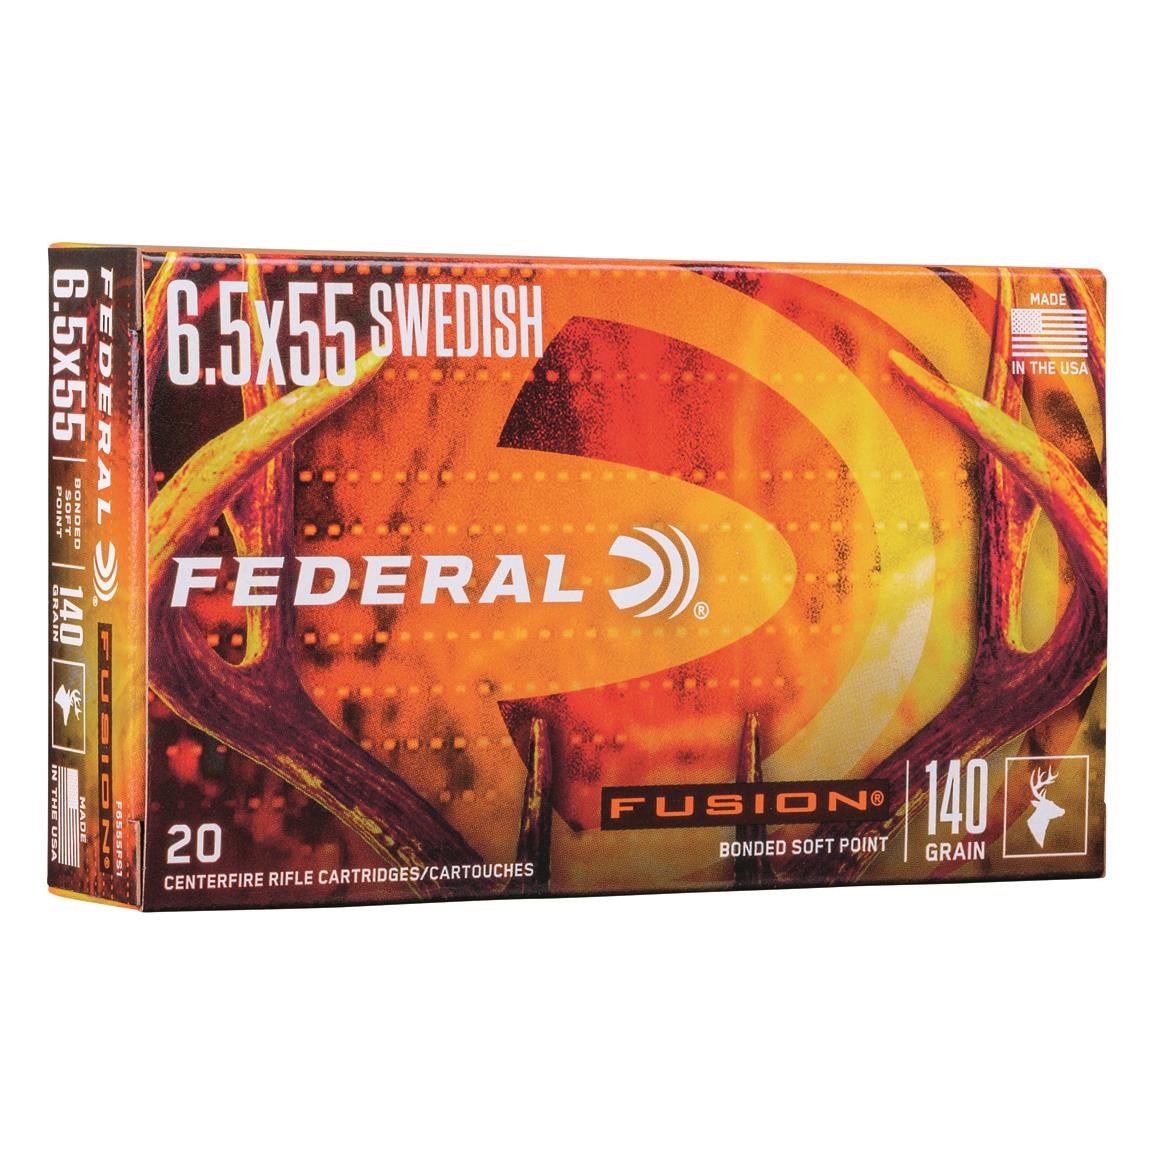 Federal Fusion, 6.5x55mm, SP, 140 Grain, 20 Rounds